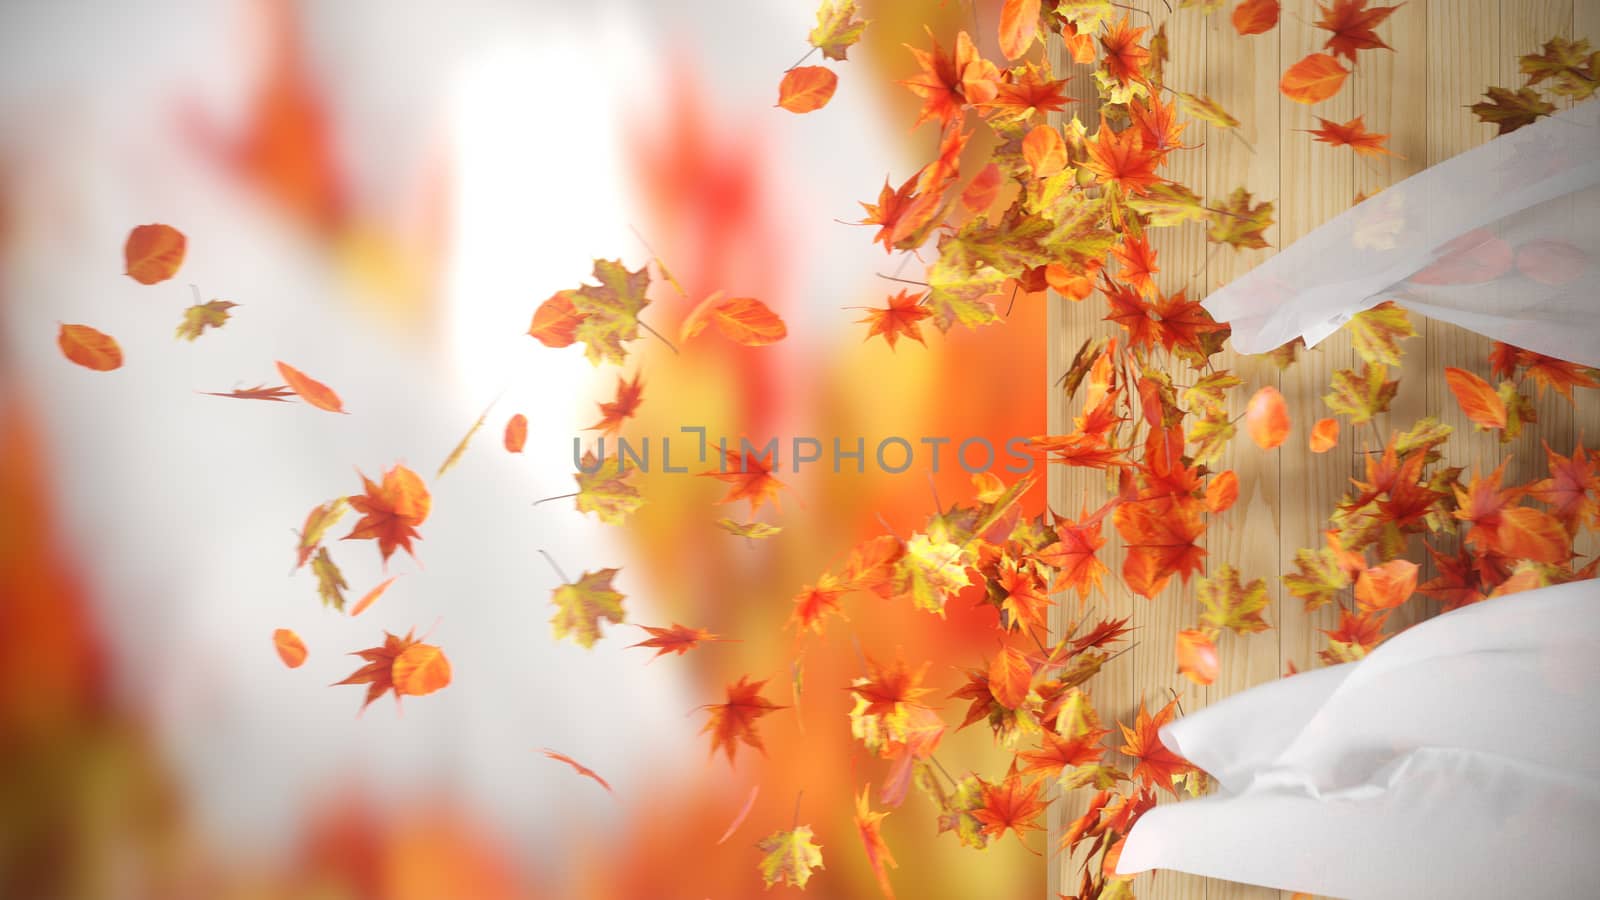 falling and winding Autumn Leaves with curtains background by denisgo